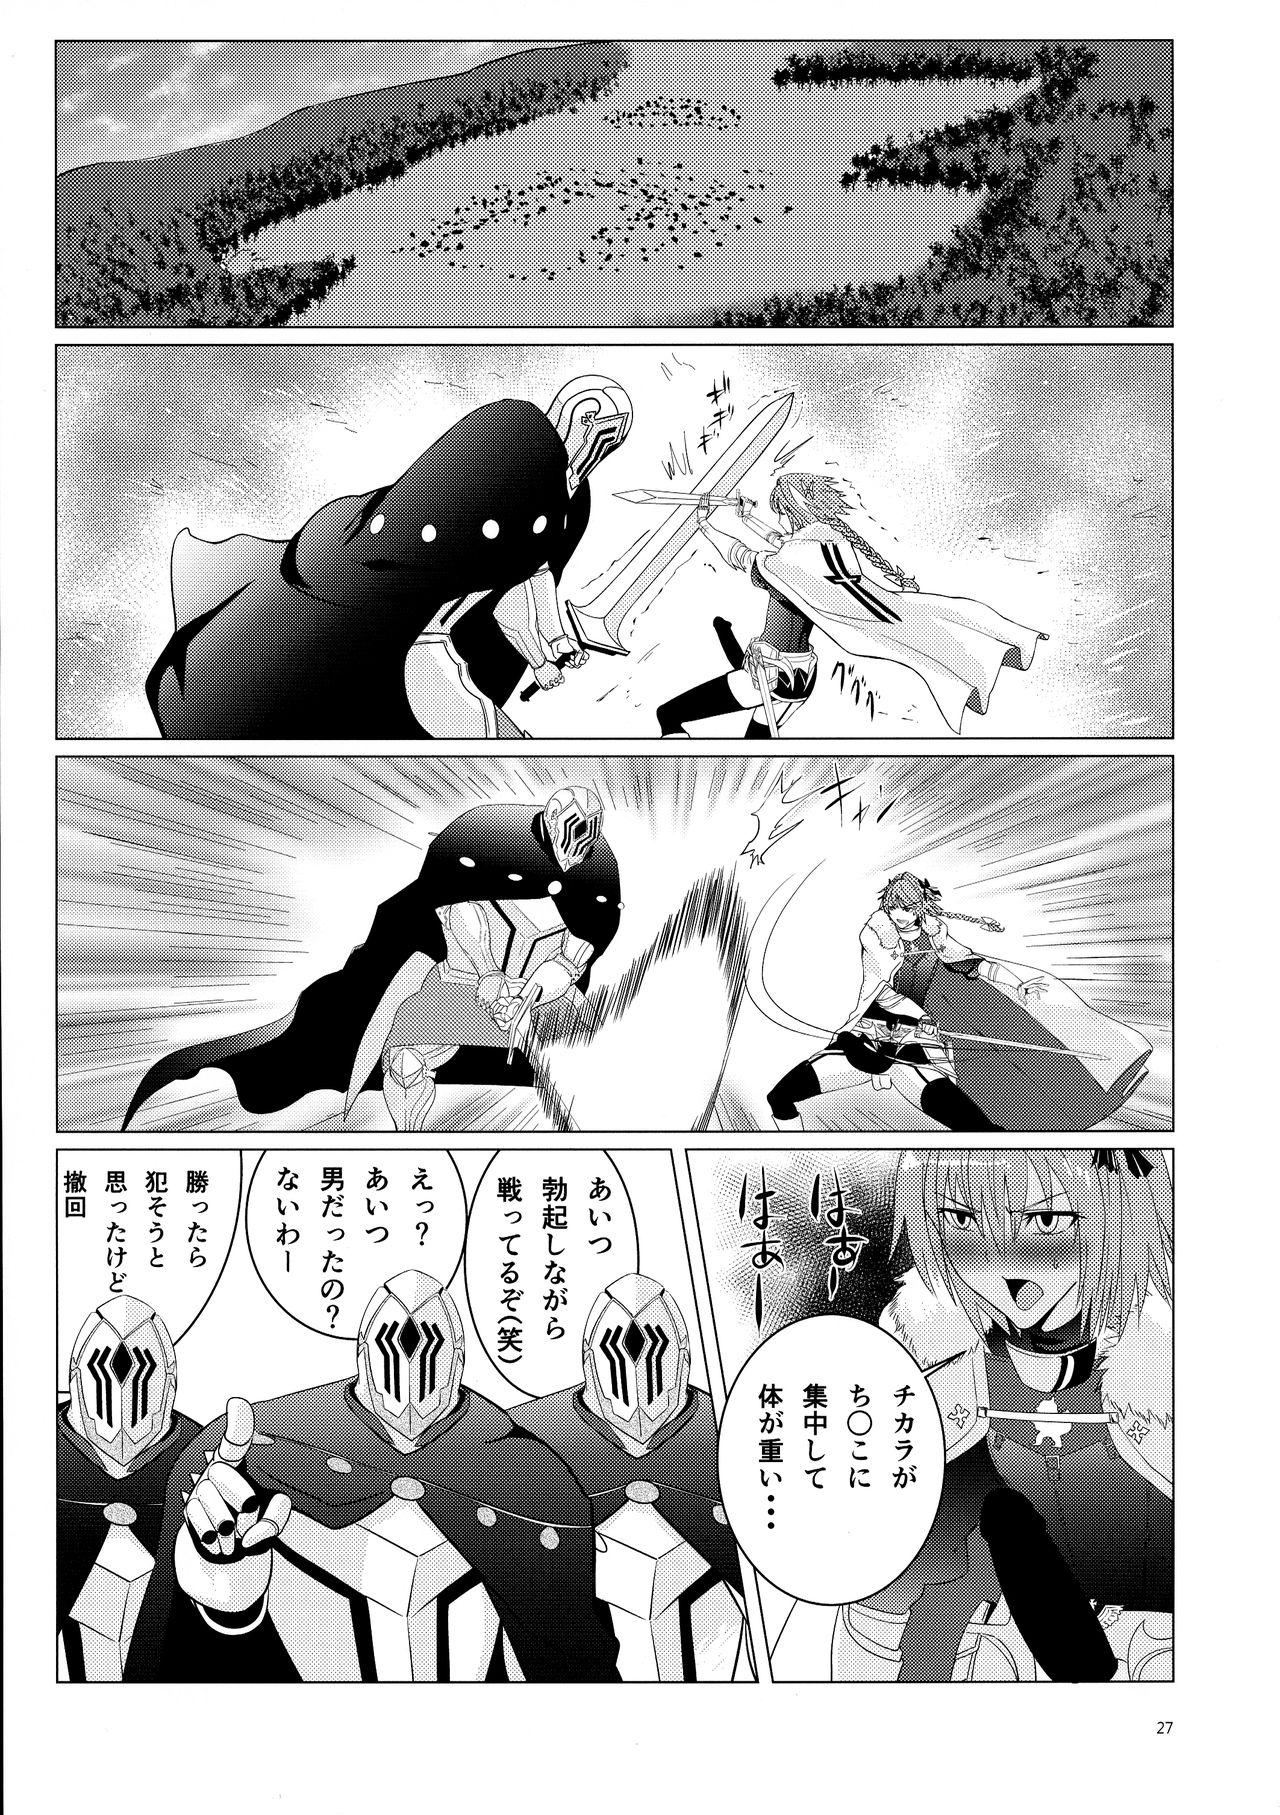 Matching Spirits - Jeanne and Astolfo have sex 23